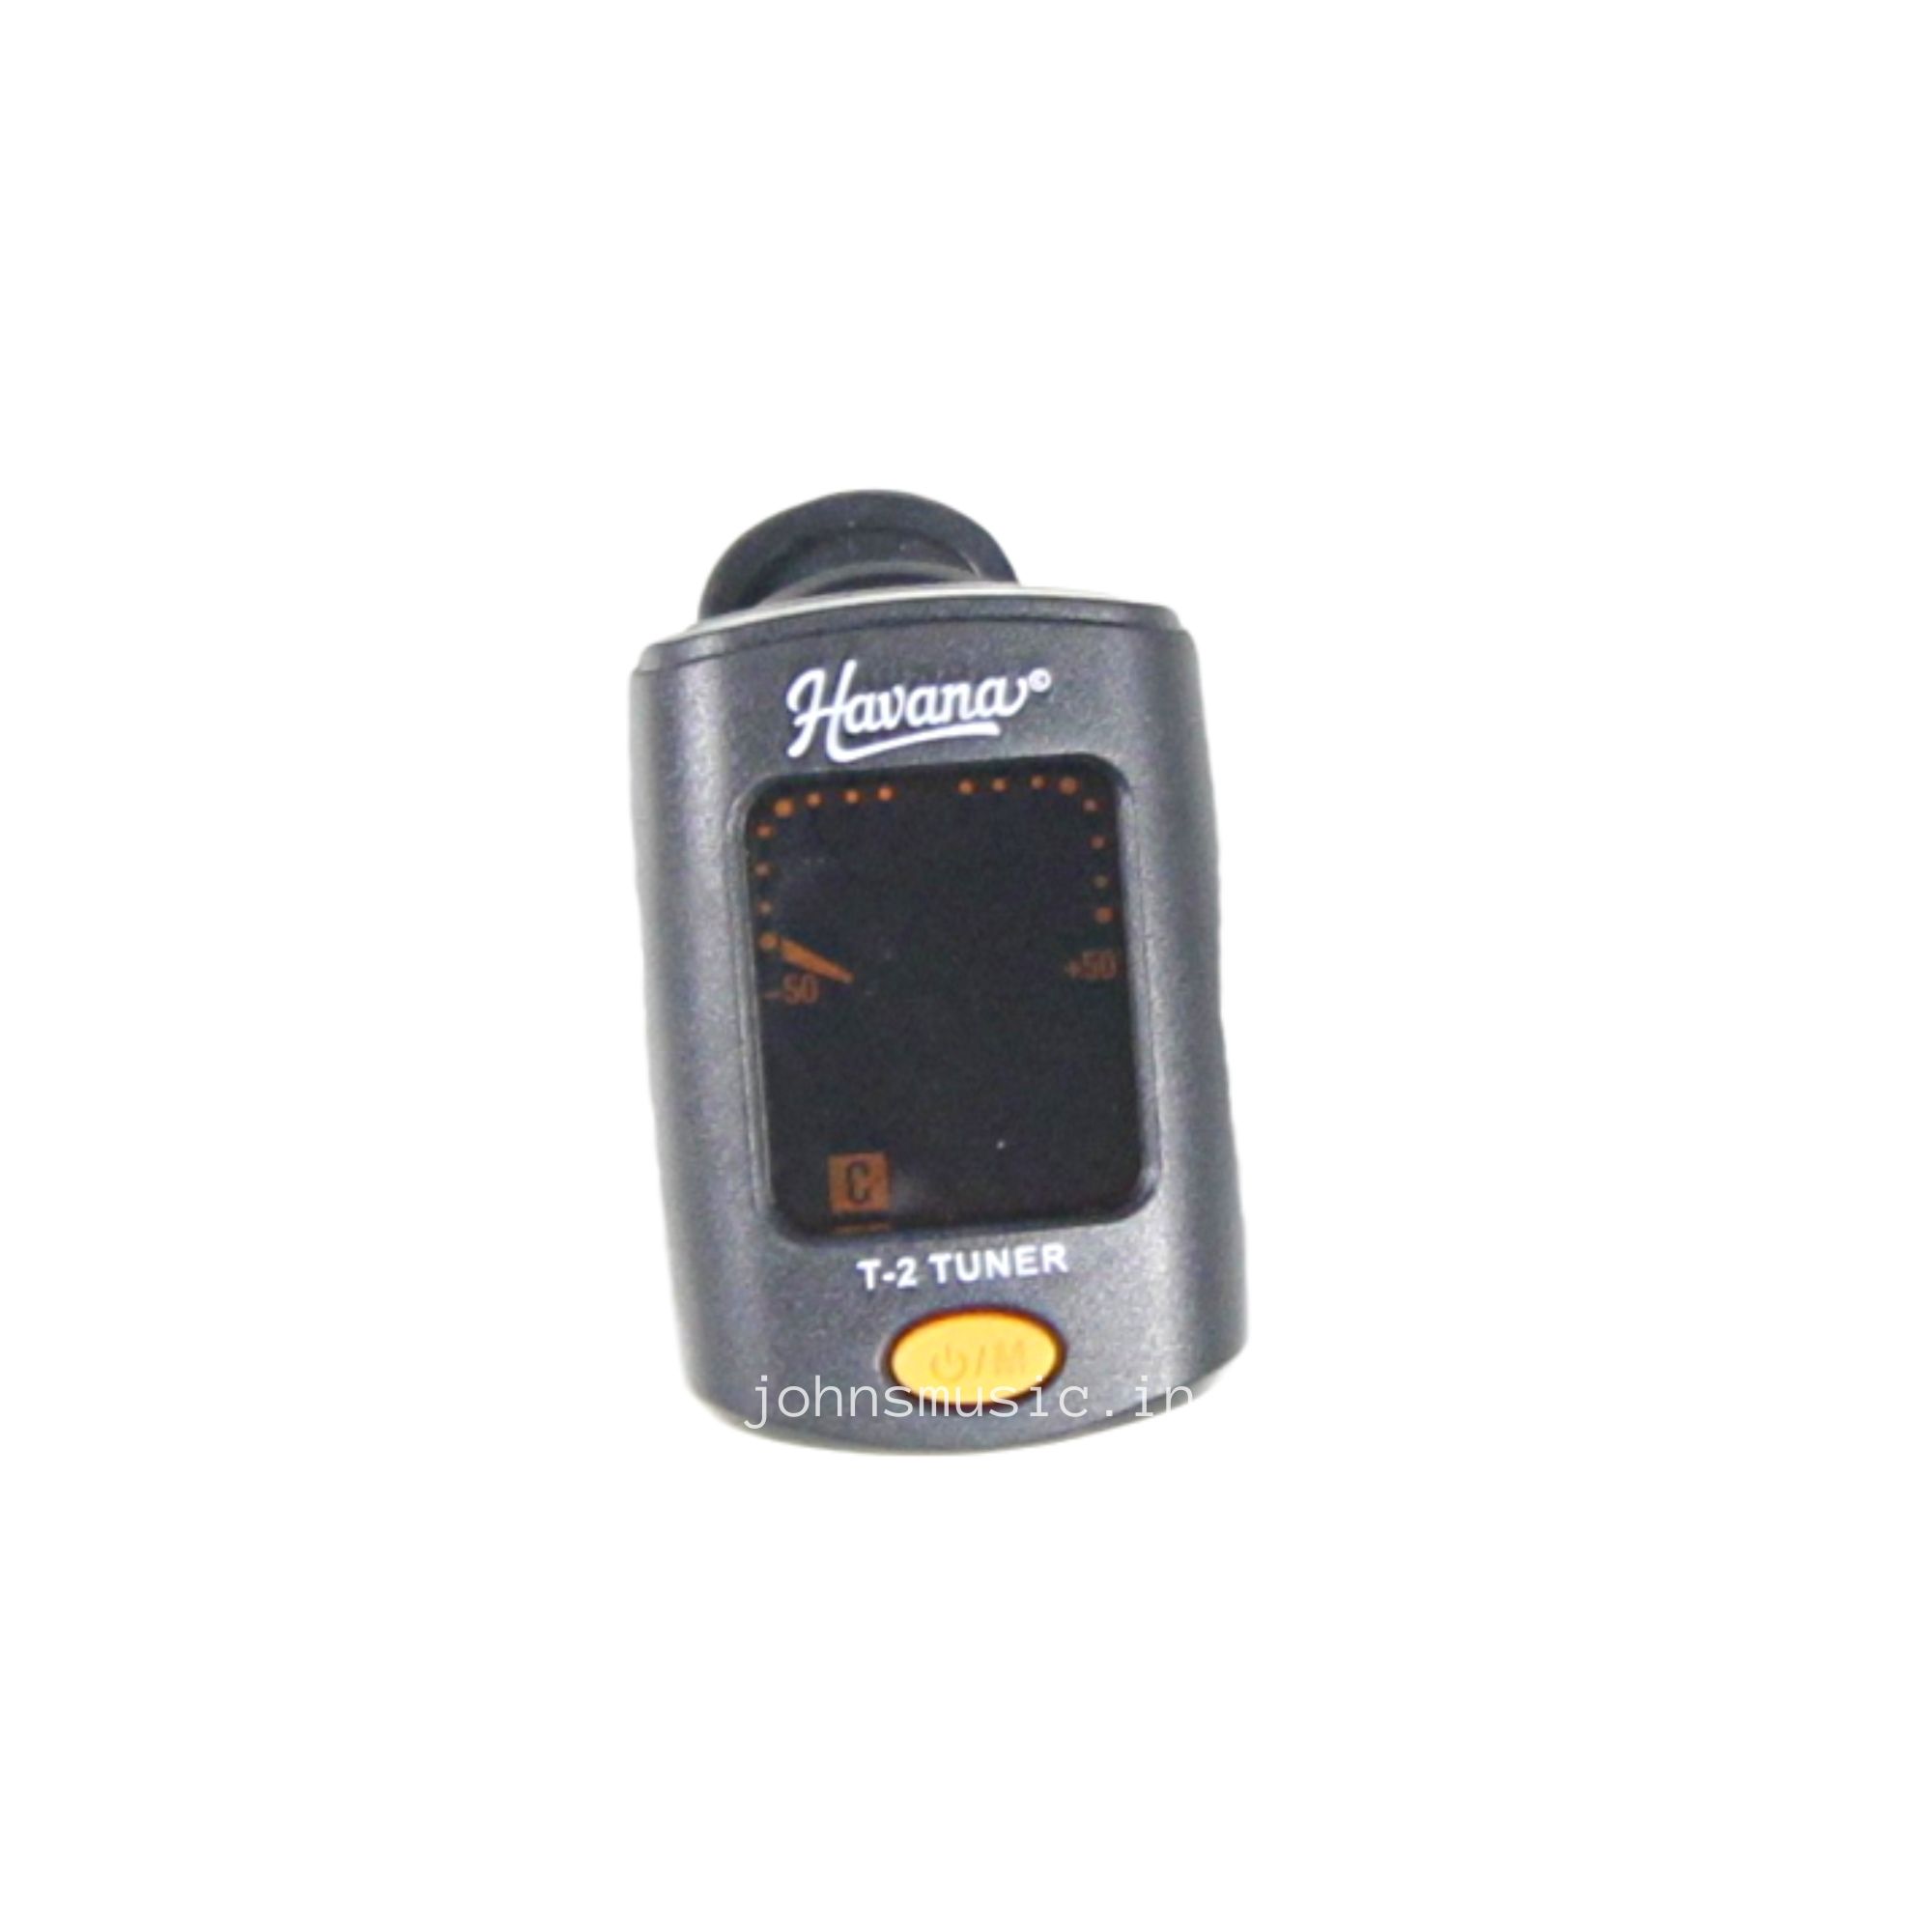 Cheapest guitar tuner in india